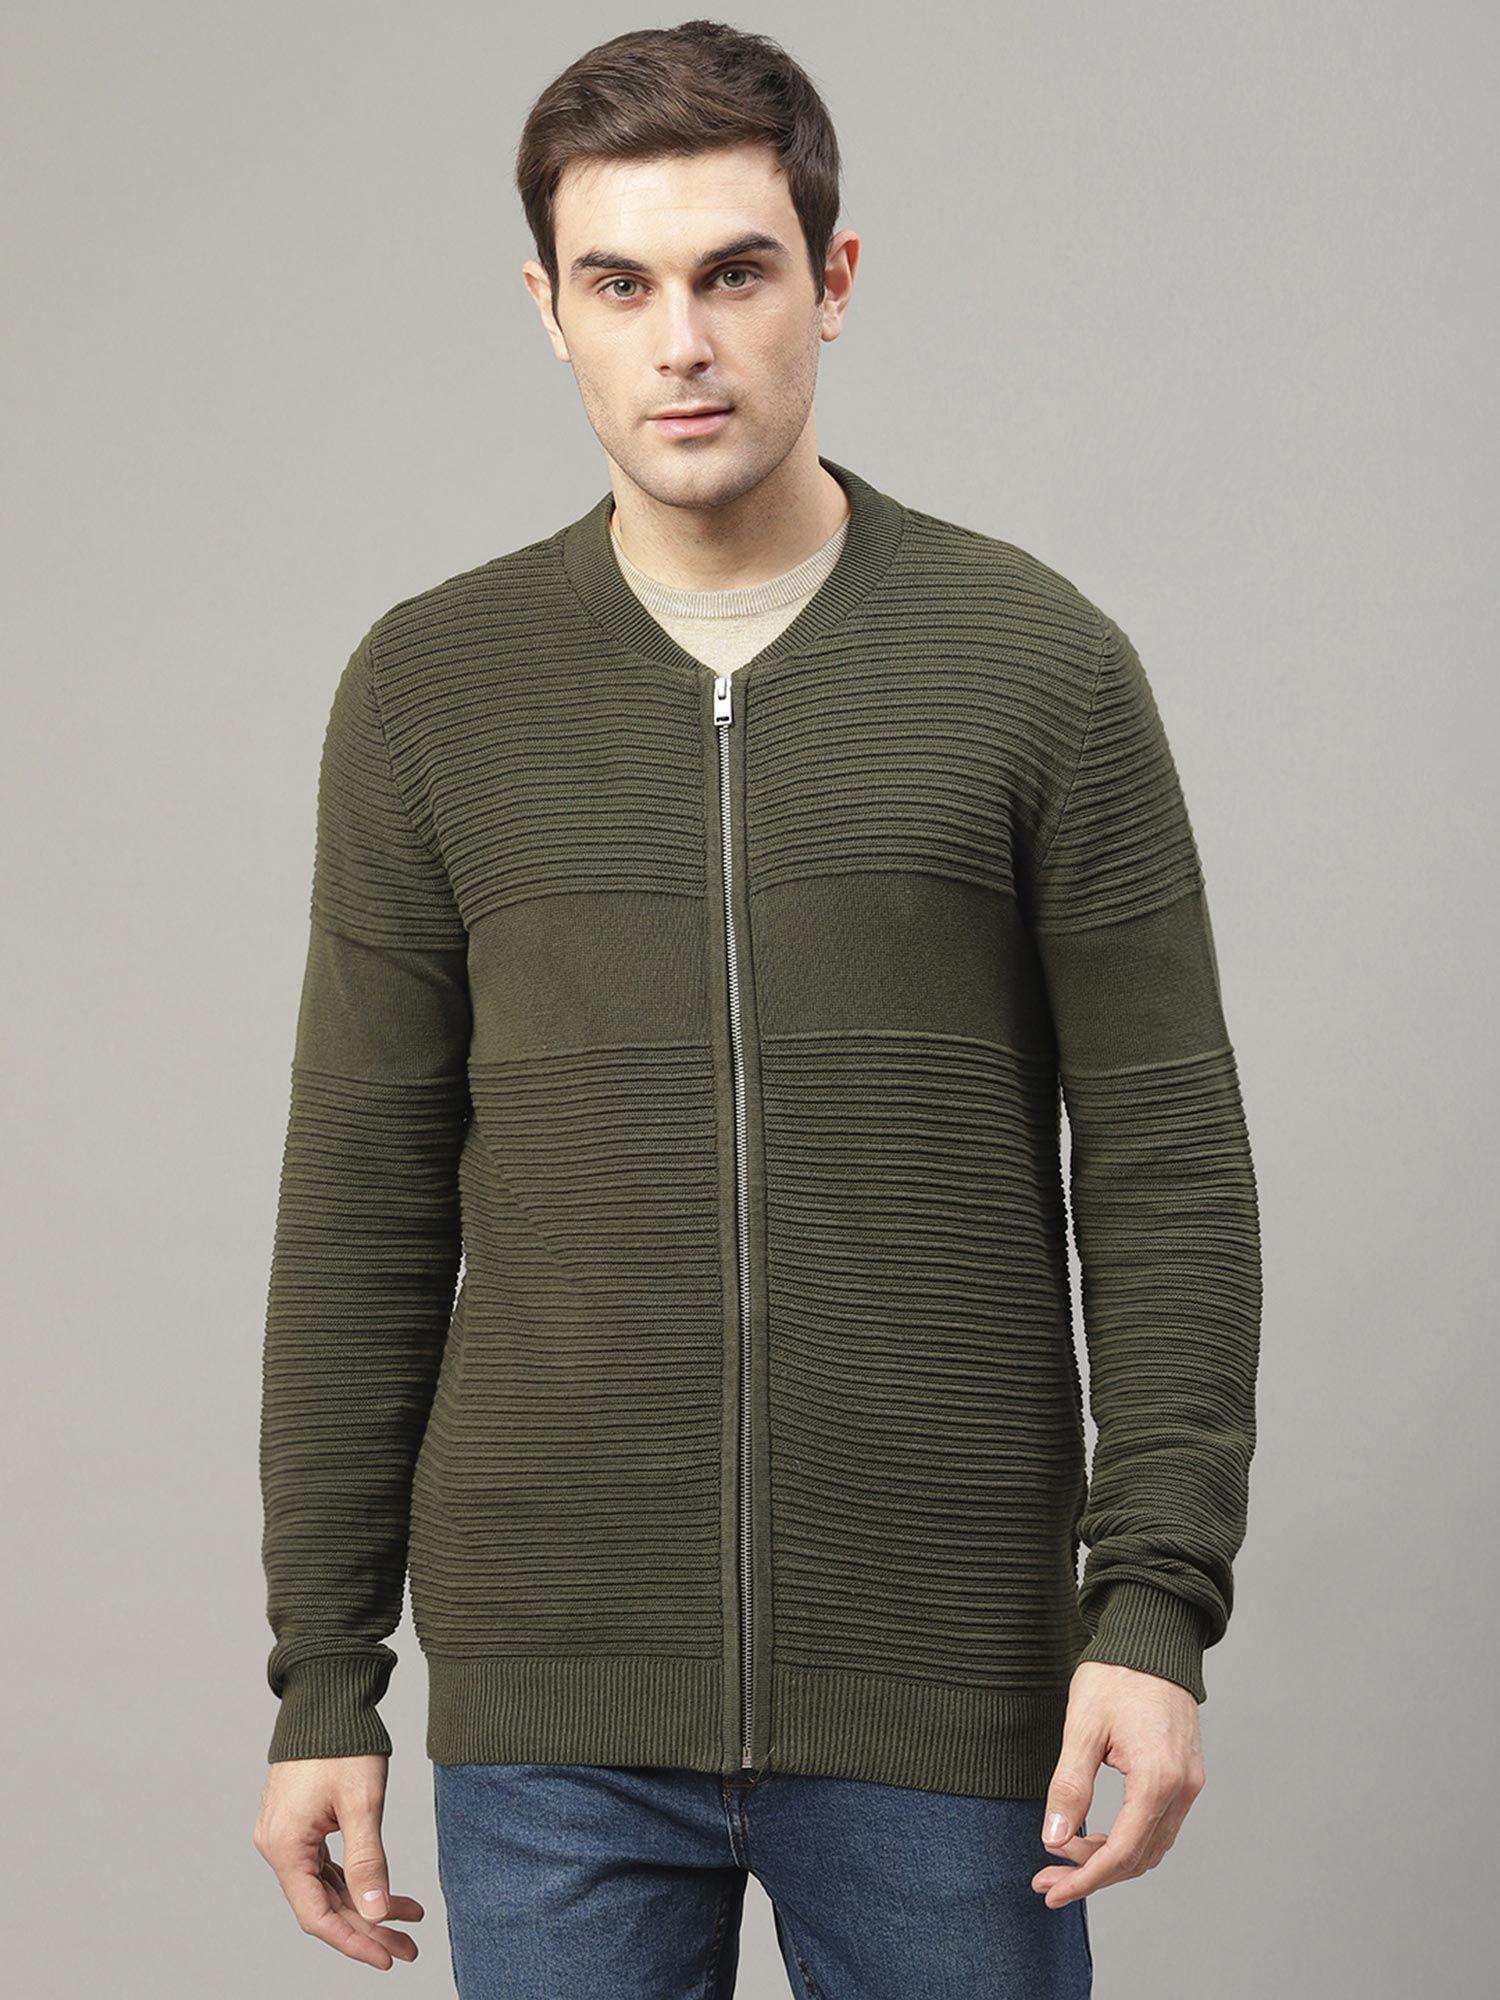 green solid sweater